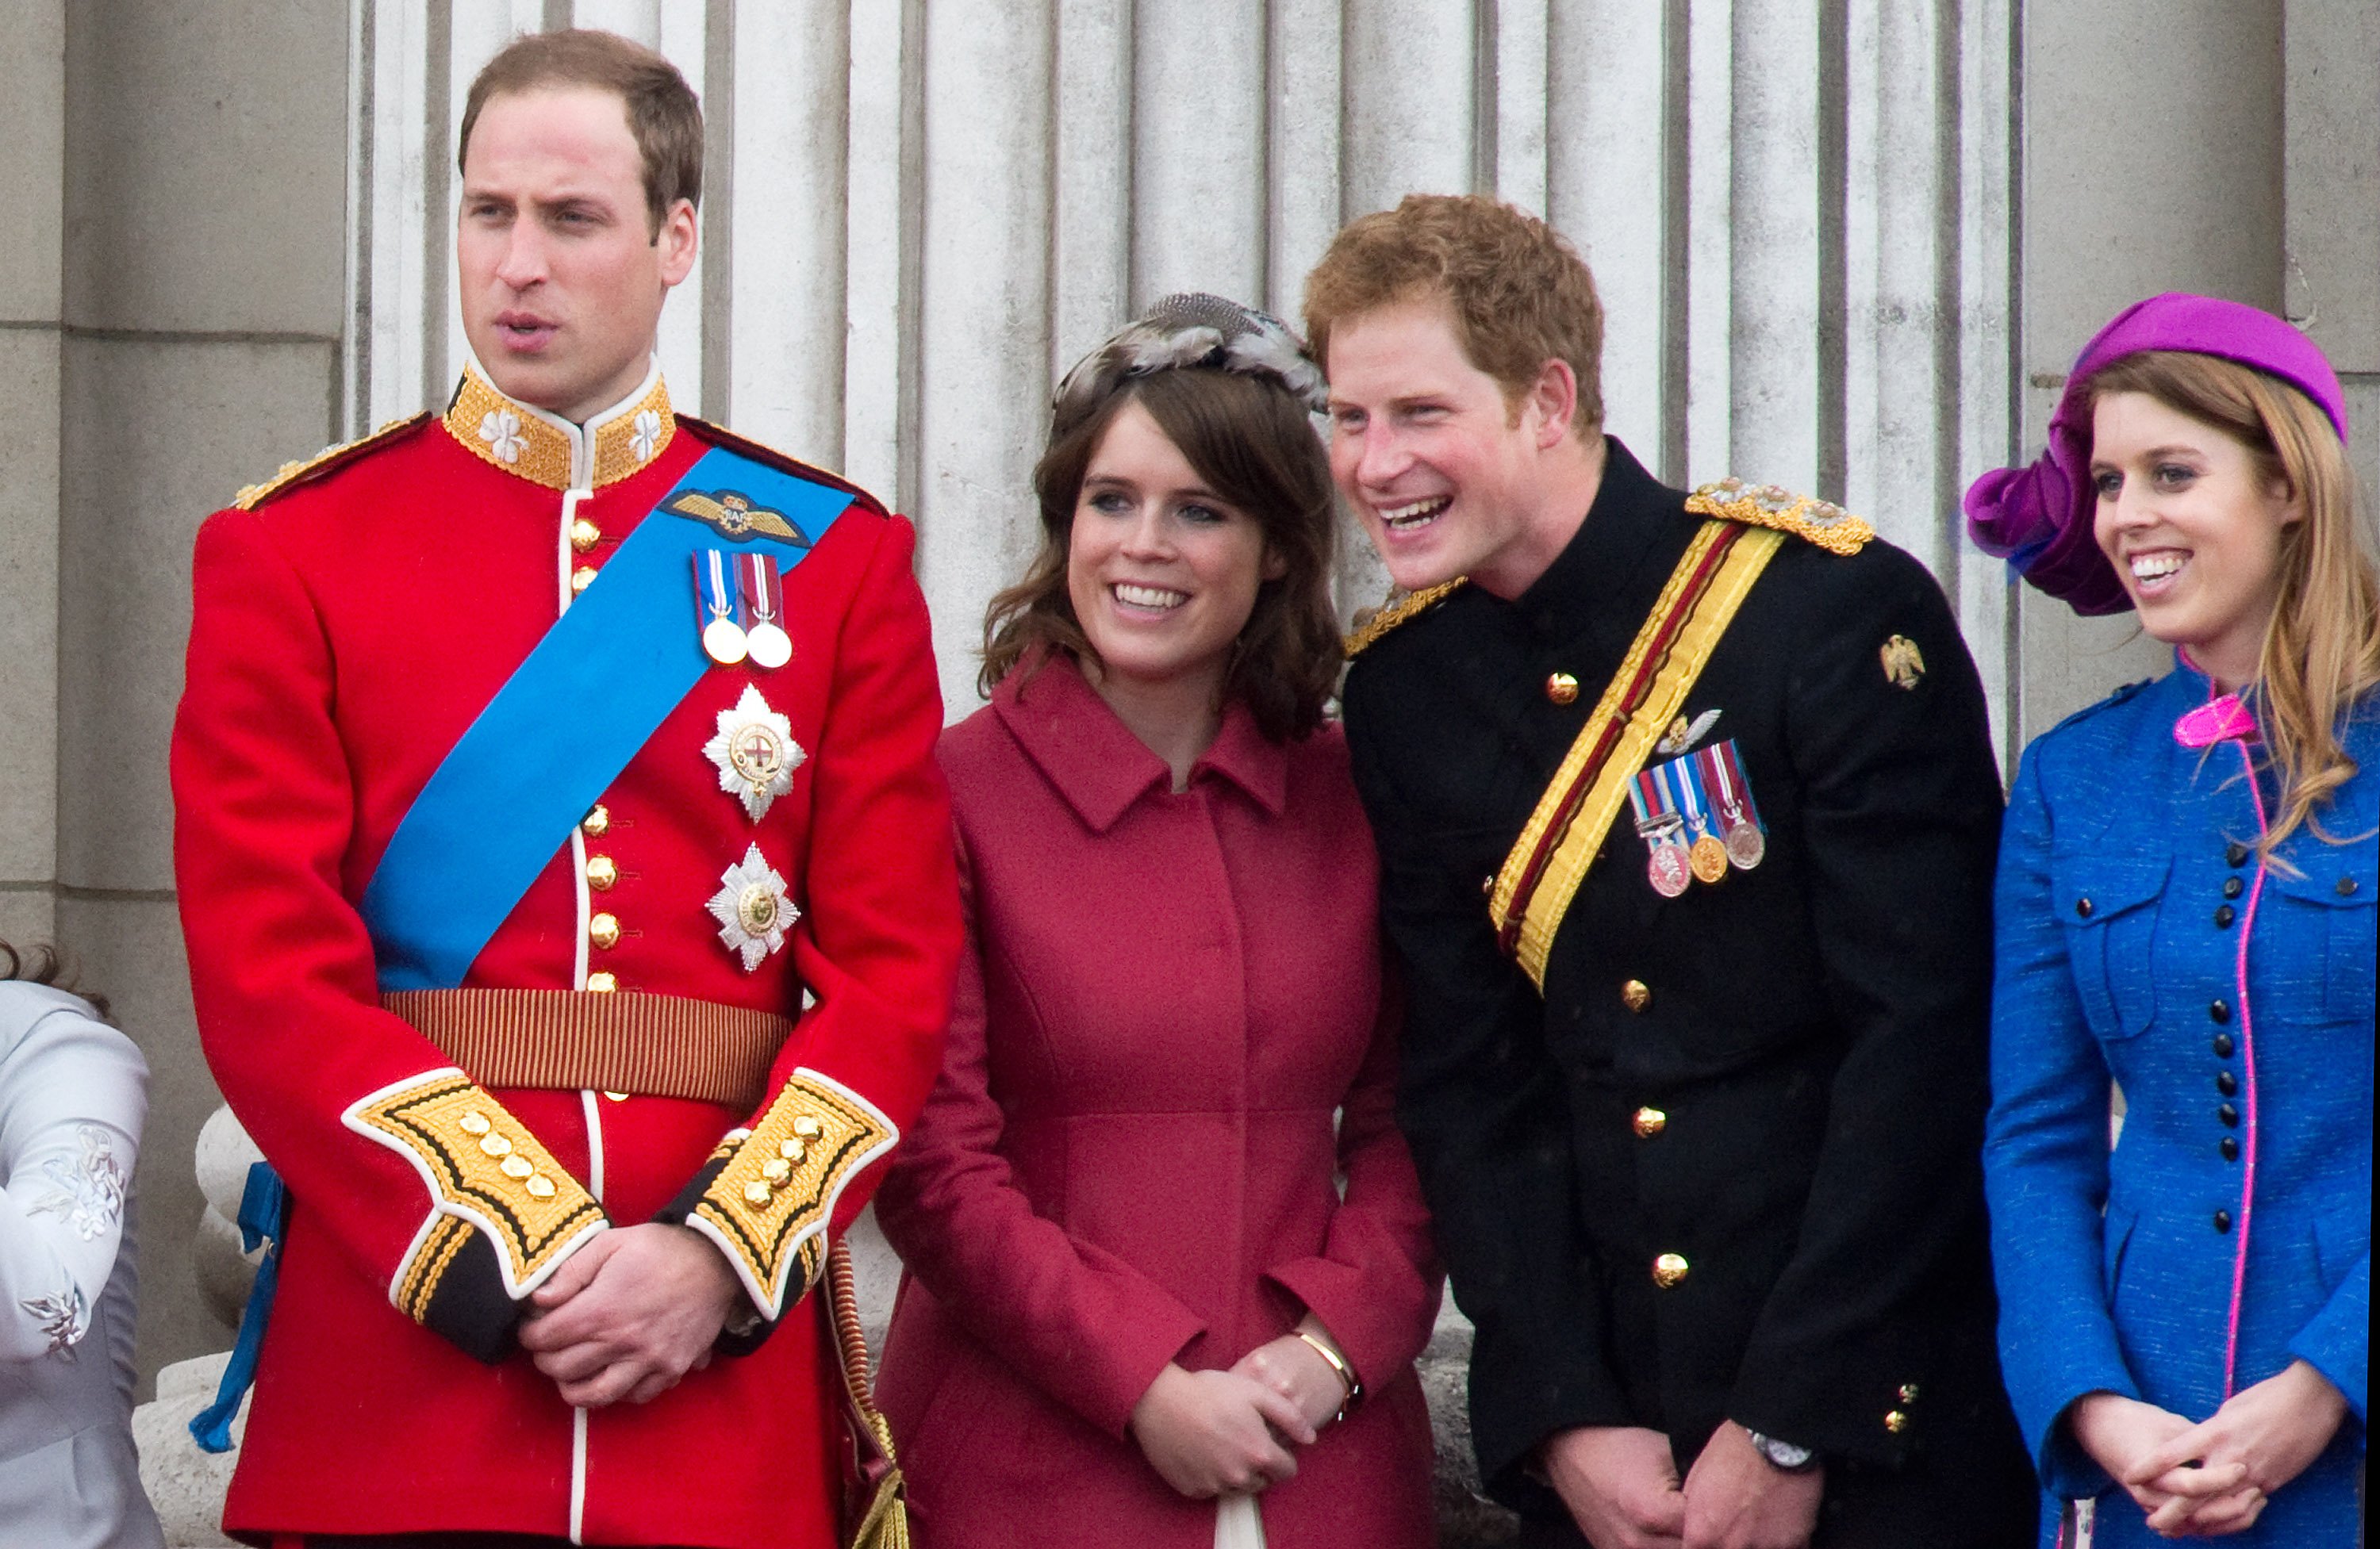 Prince William, Princess Eugenie, Prince Harry, and Princess Beatrice, who were once forbid from seeing each other, standing on the balcony of Buckingham Palace following the Trooping the Colour Ceremony